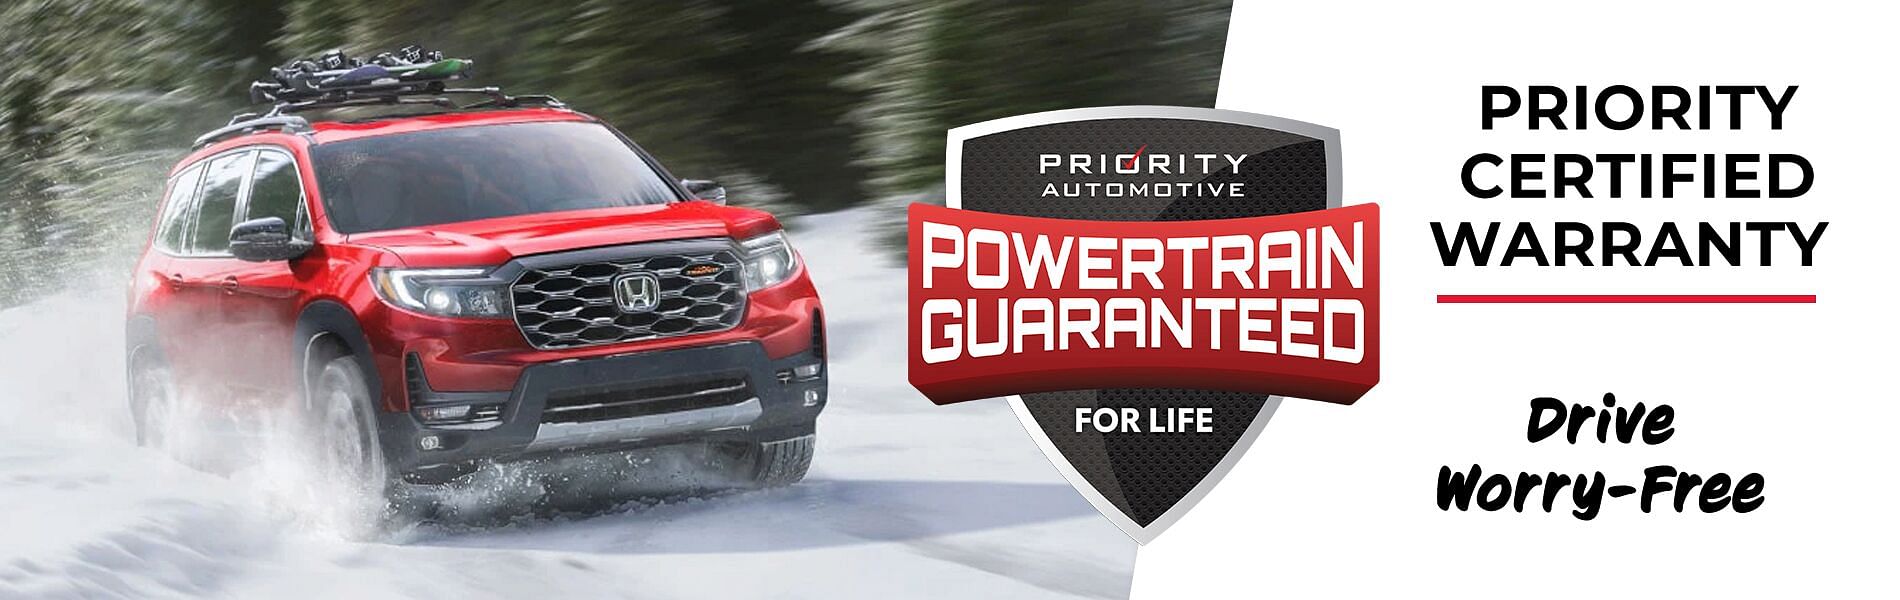 A red honda driving through the snow - Powertrain guaranteed. Priority certified warranty, drive worry-free